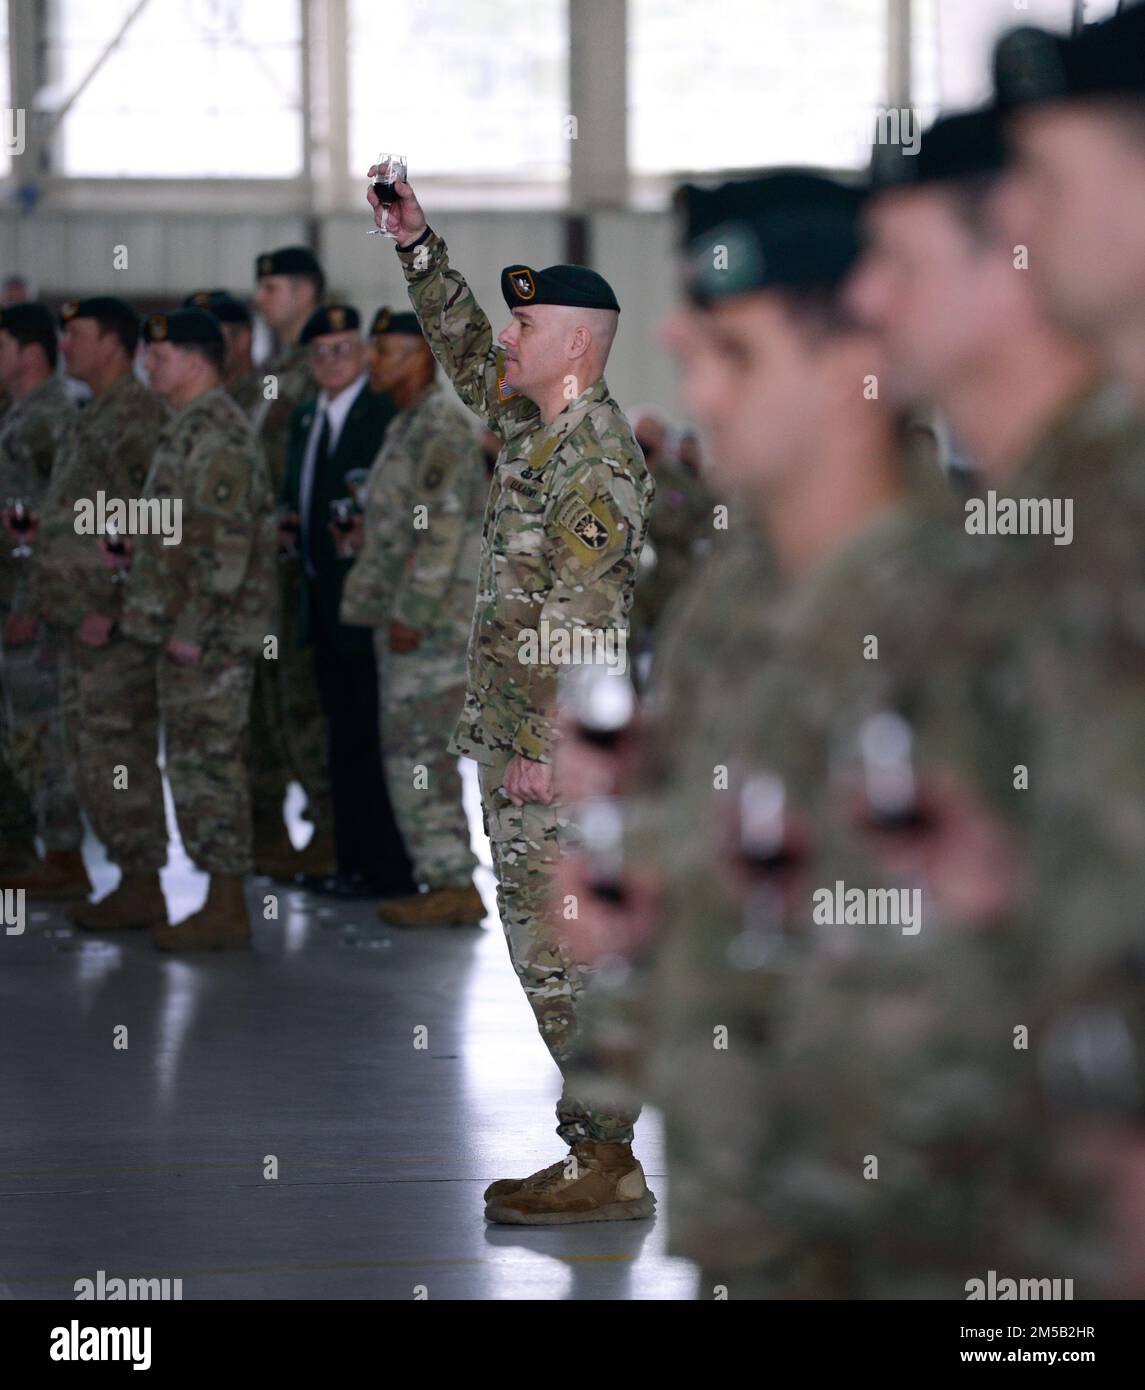 Lieutenant Colonel Patrick Toohey, commander, 4th Battalion, 1st Special Warfare Training Group (Airborne) toasts the Special Forces Regiment during a graduation ceremony at Fort Bragg, North Carolina February 17, 2022. The ceremony marked the completion of the Special Forces Qualification Course where Soldiers earned the honor of wearing the green beret, the official headgear of Special Forces. Stock Photo